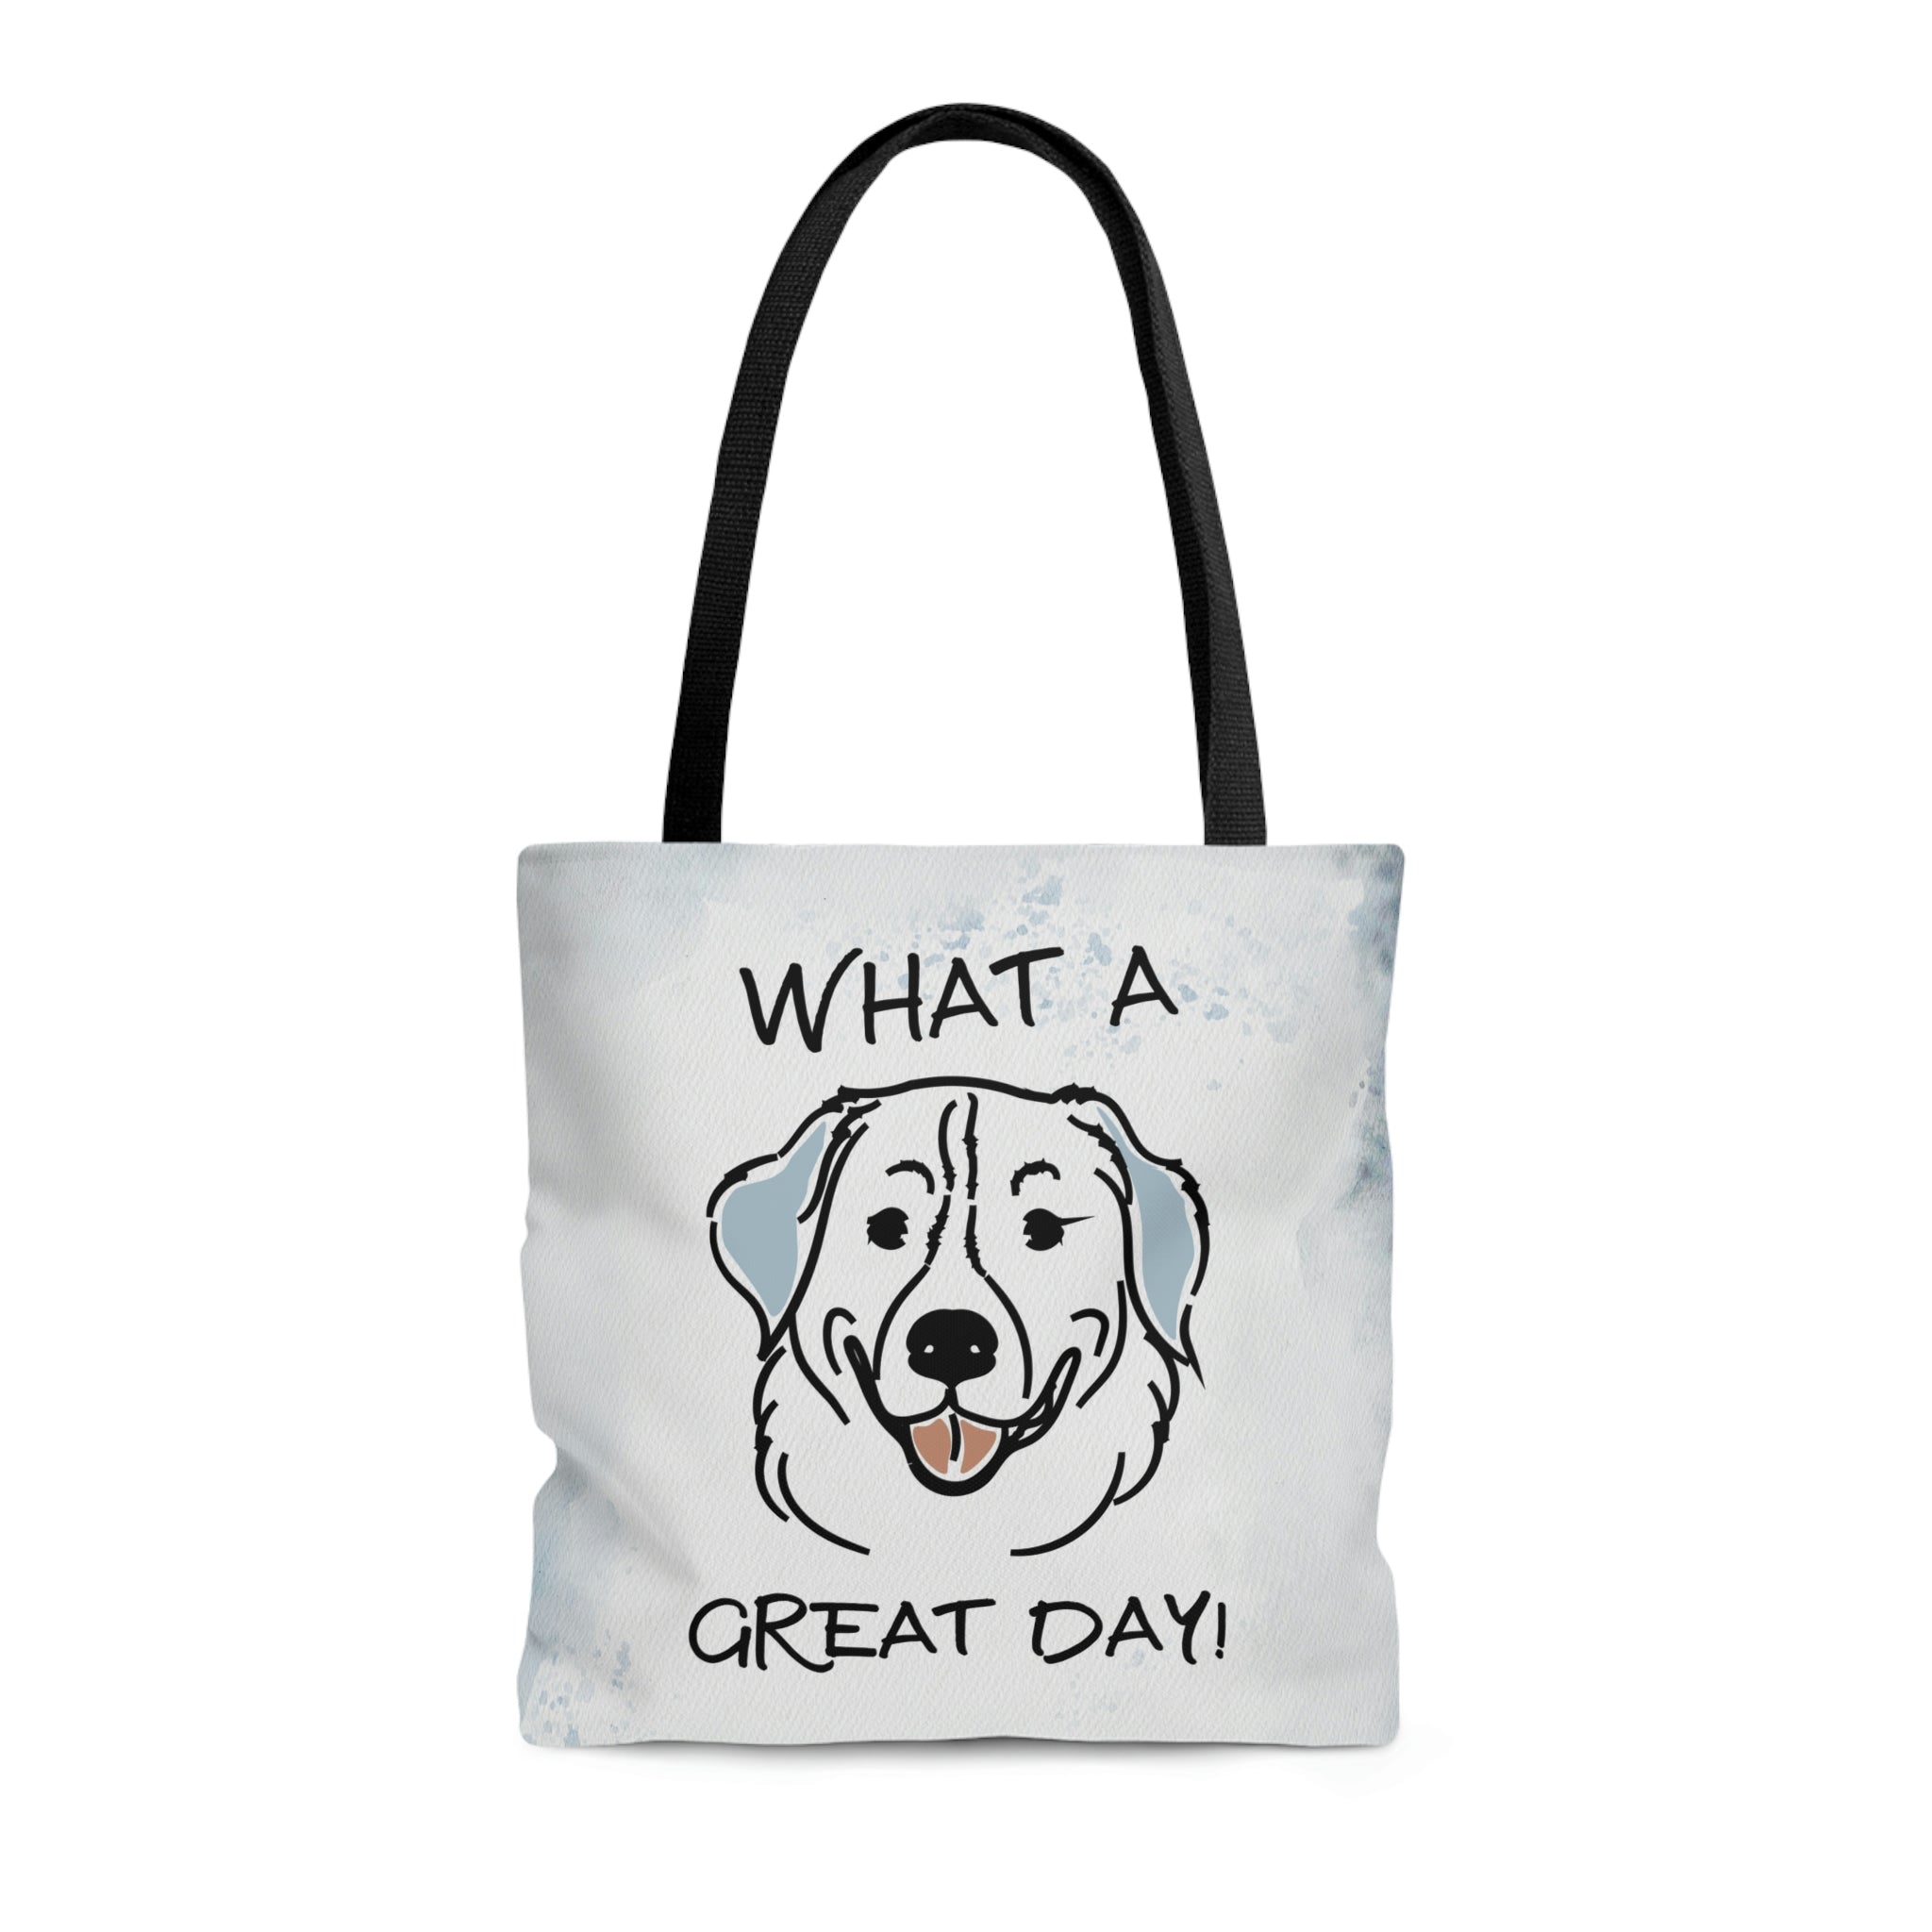 A Great Day Tote Bag